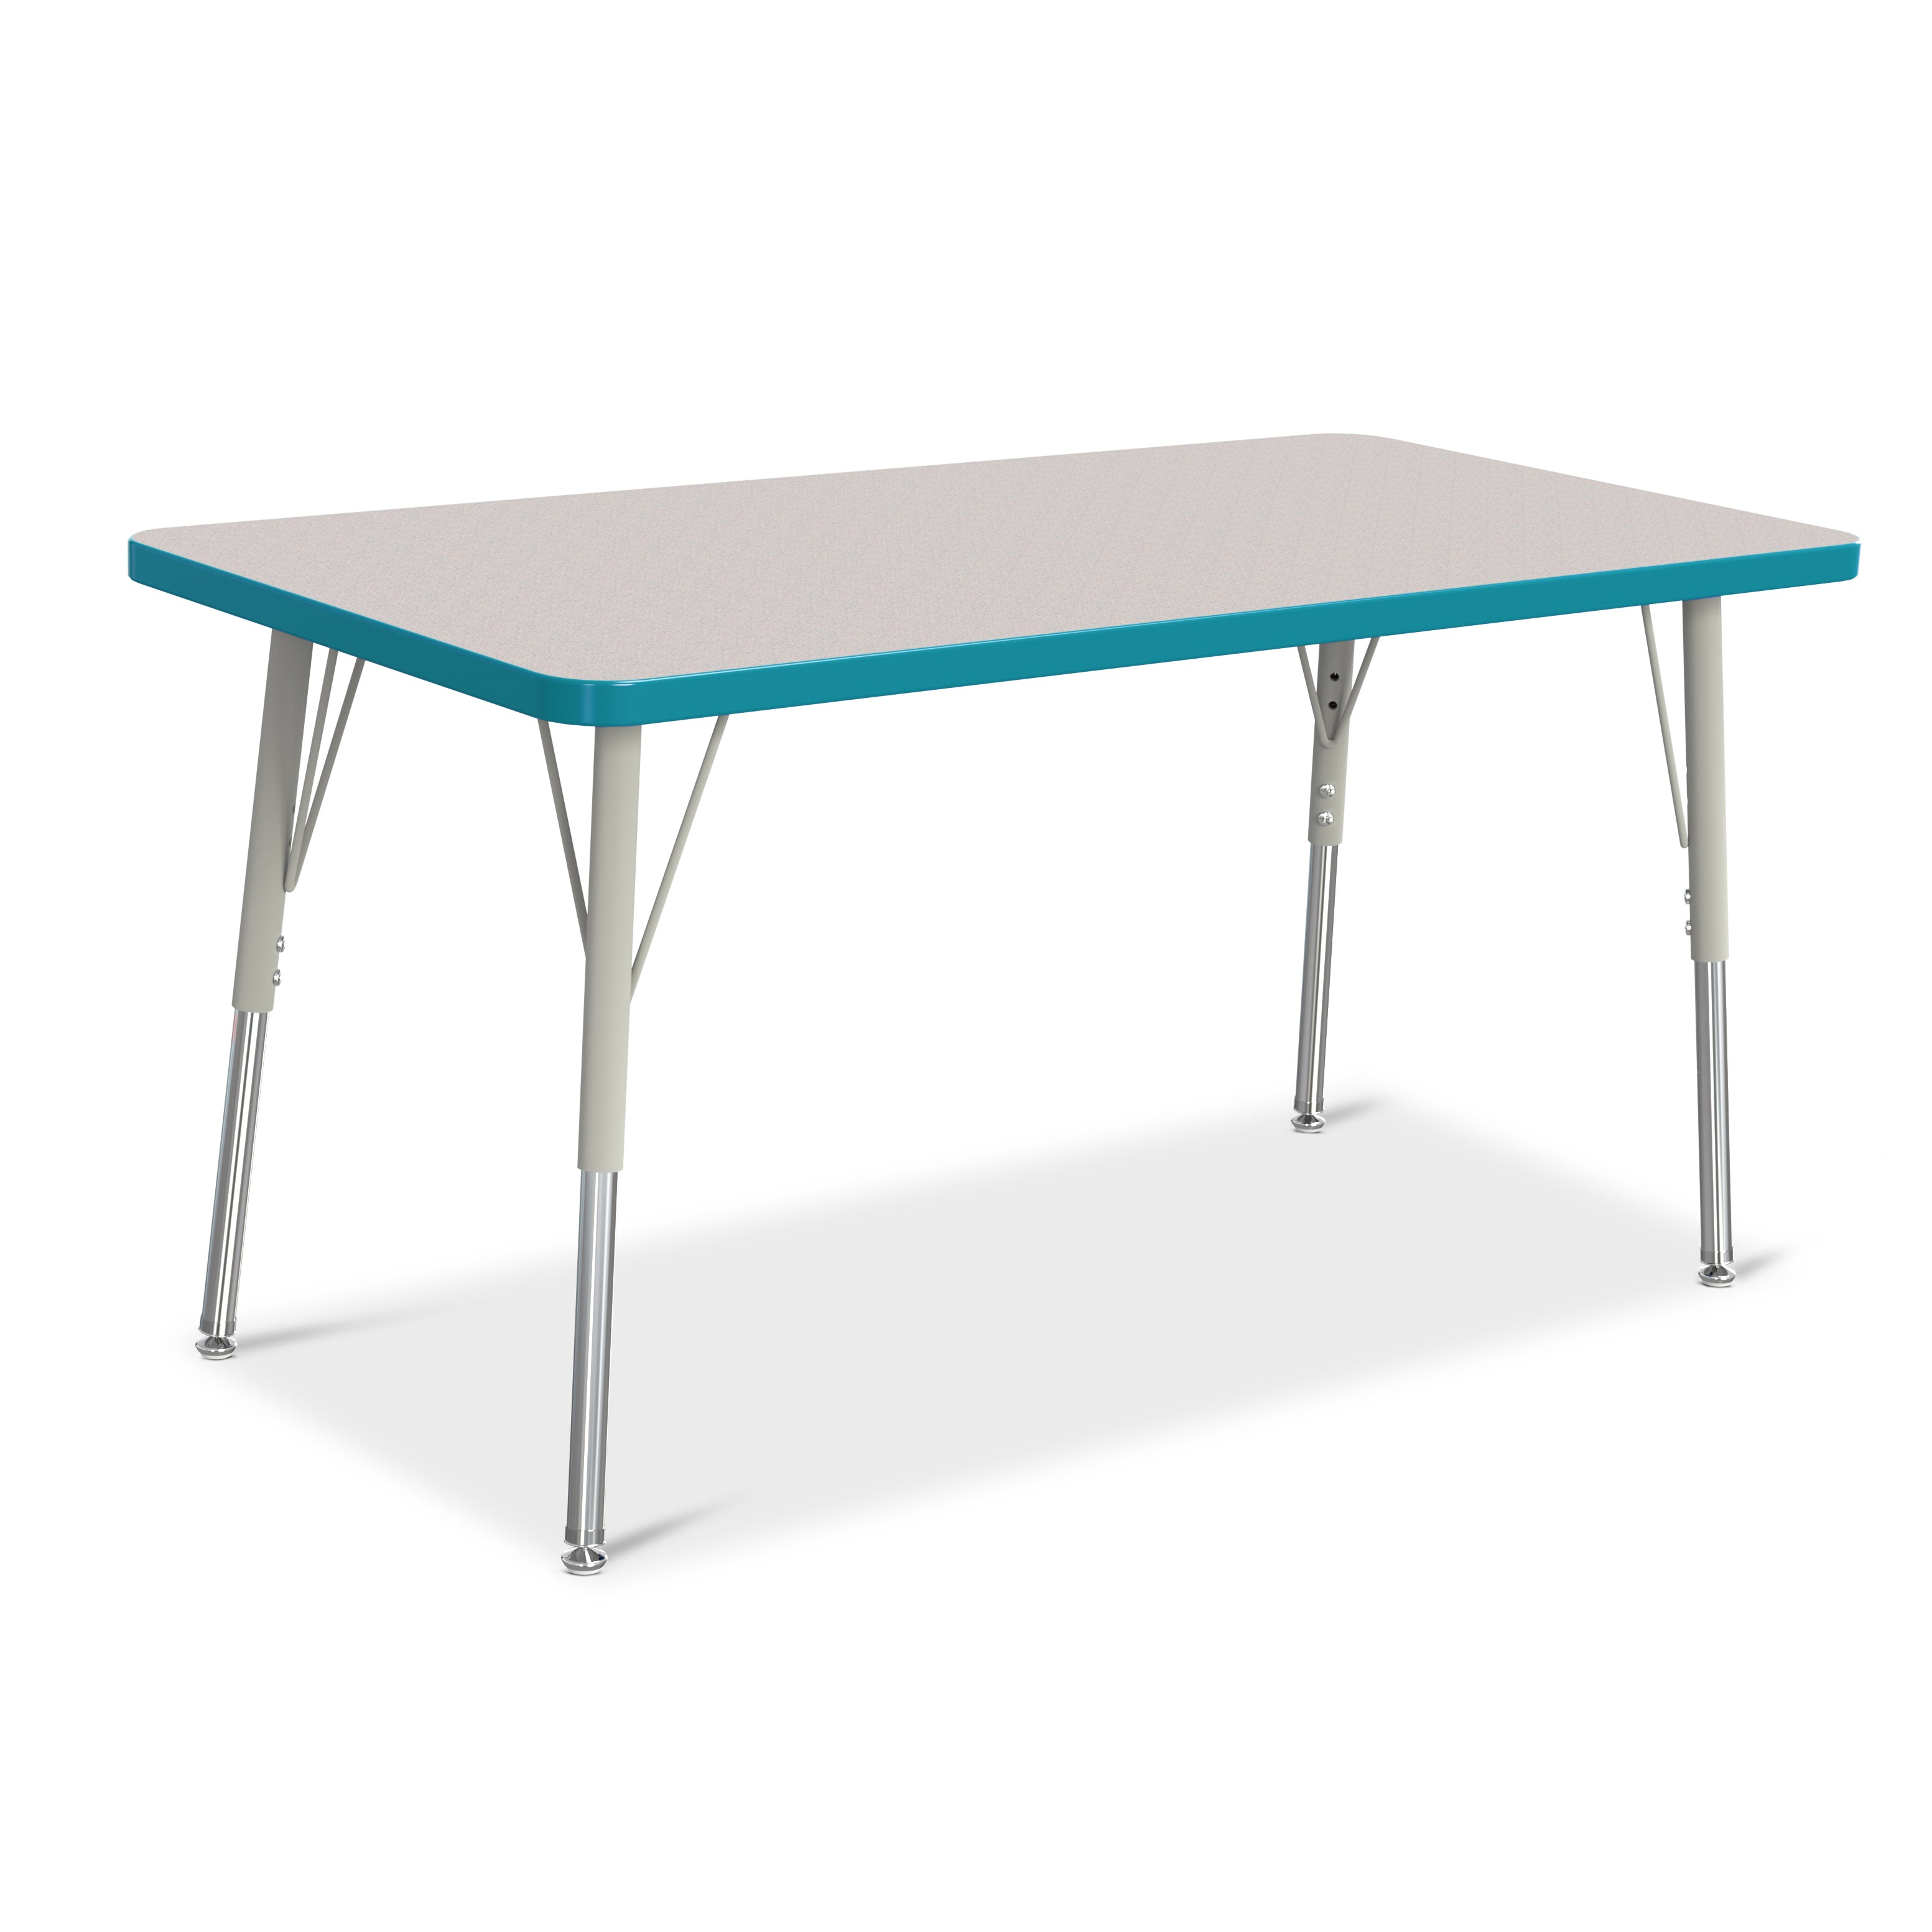 6403JCA005, Berries Rectangle Activity Table - 24" X 48", A-height - Freckled Gray/Teal/Gray